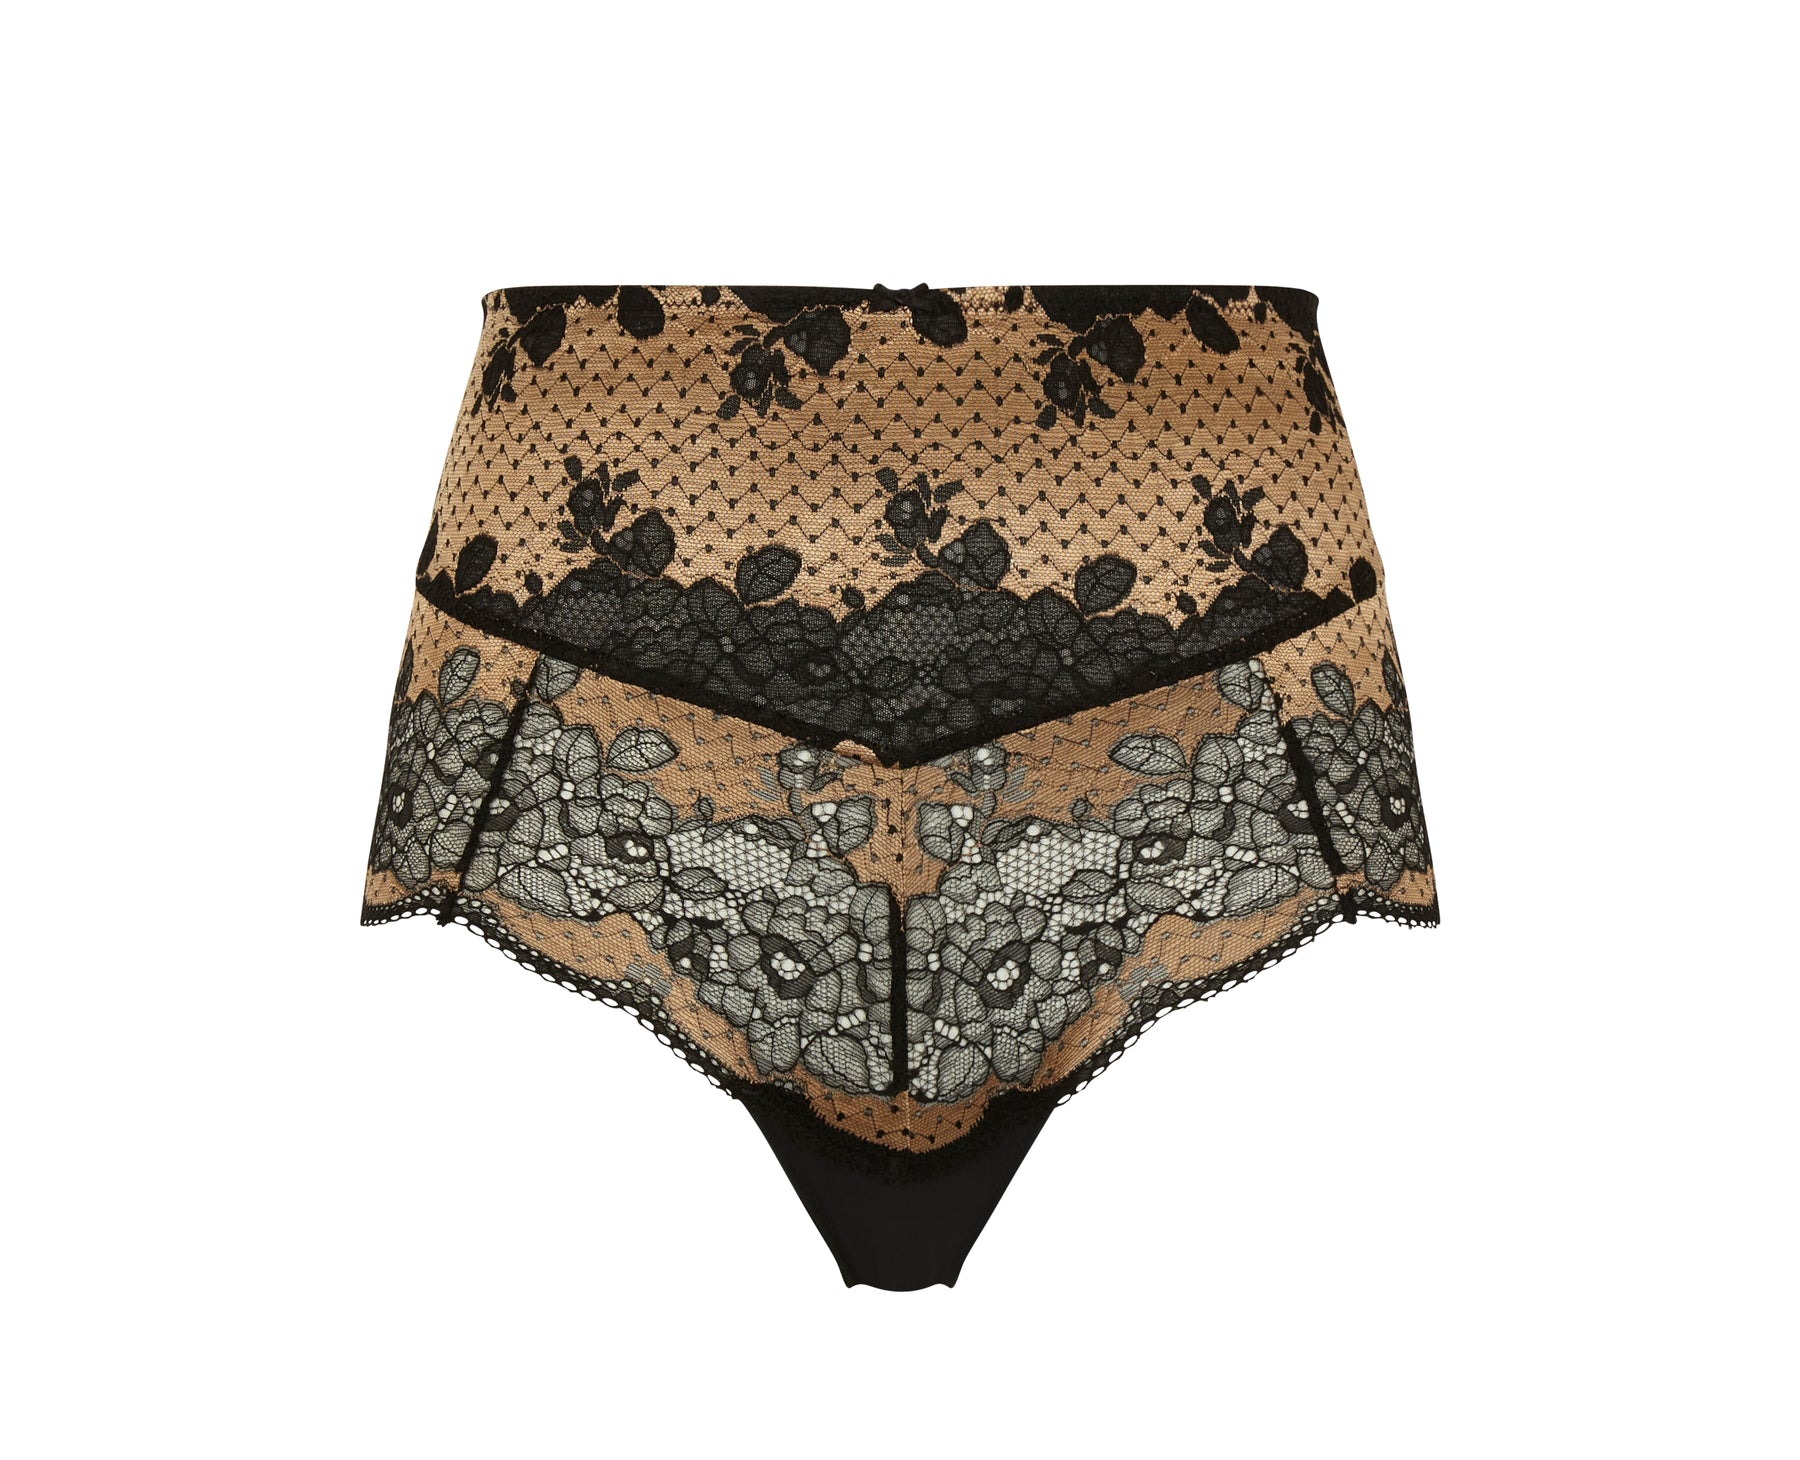 Panache Lingerie - Clara in Olive Black is here for a good time